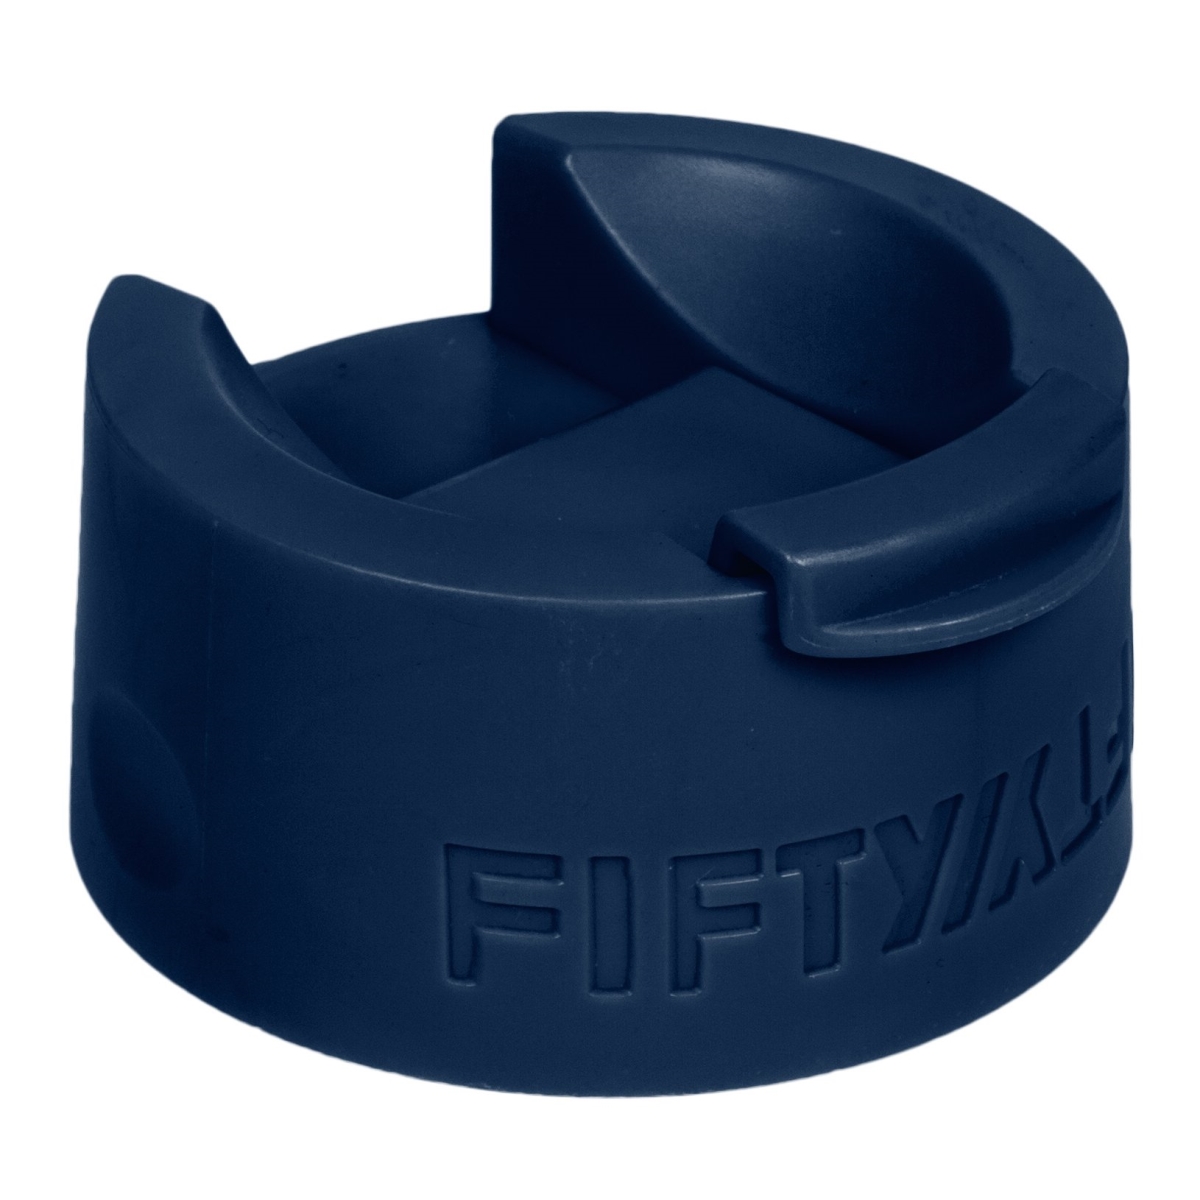 A68003nb0 Fifty & Fifty Wide-mouth Coffee Flip-top Cap, Navy Blue